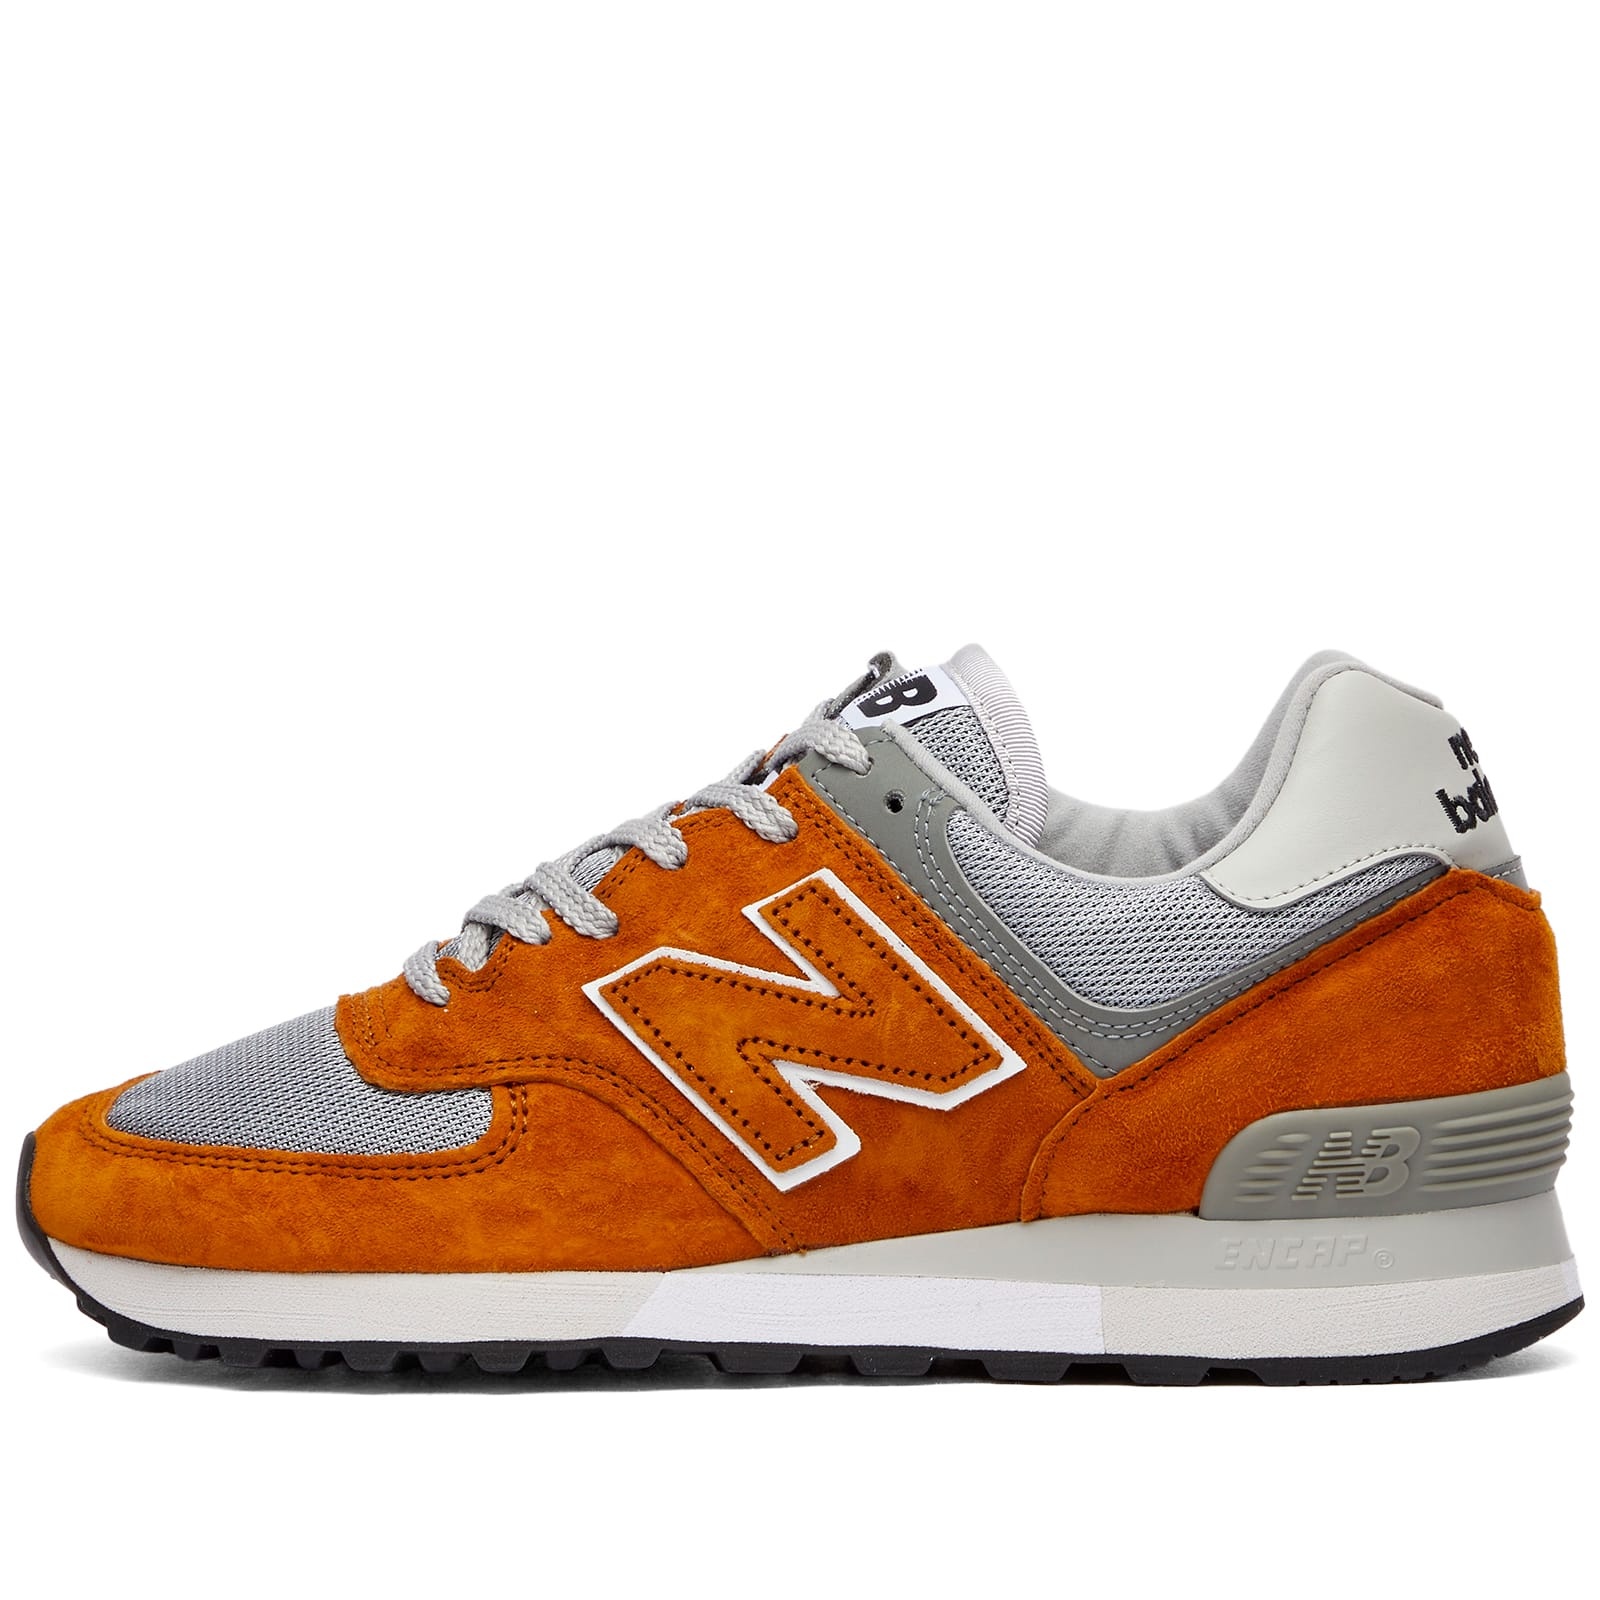 New Balance OU576OOK - Made in UK - 2